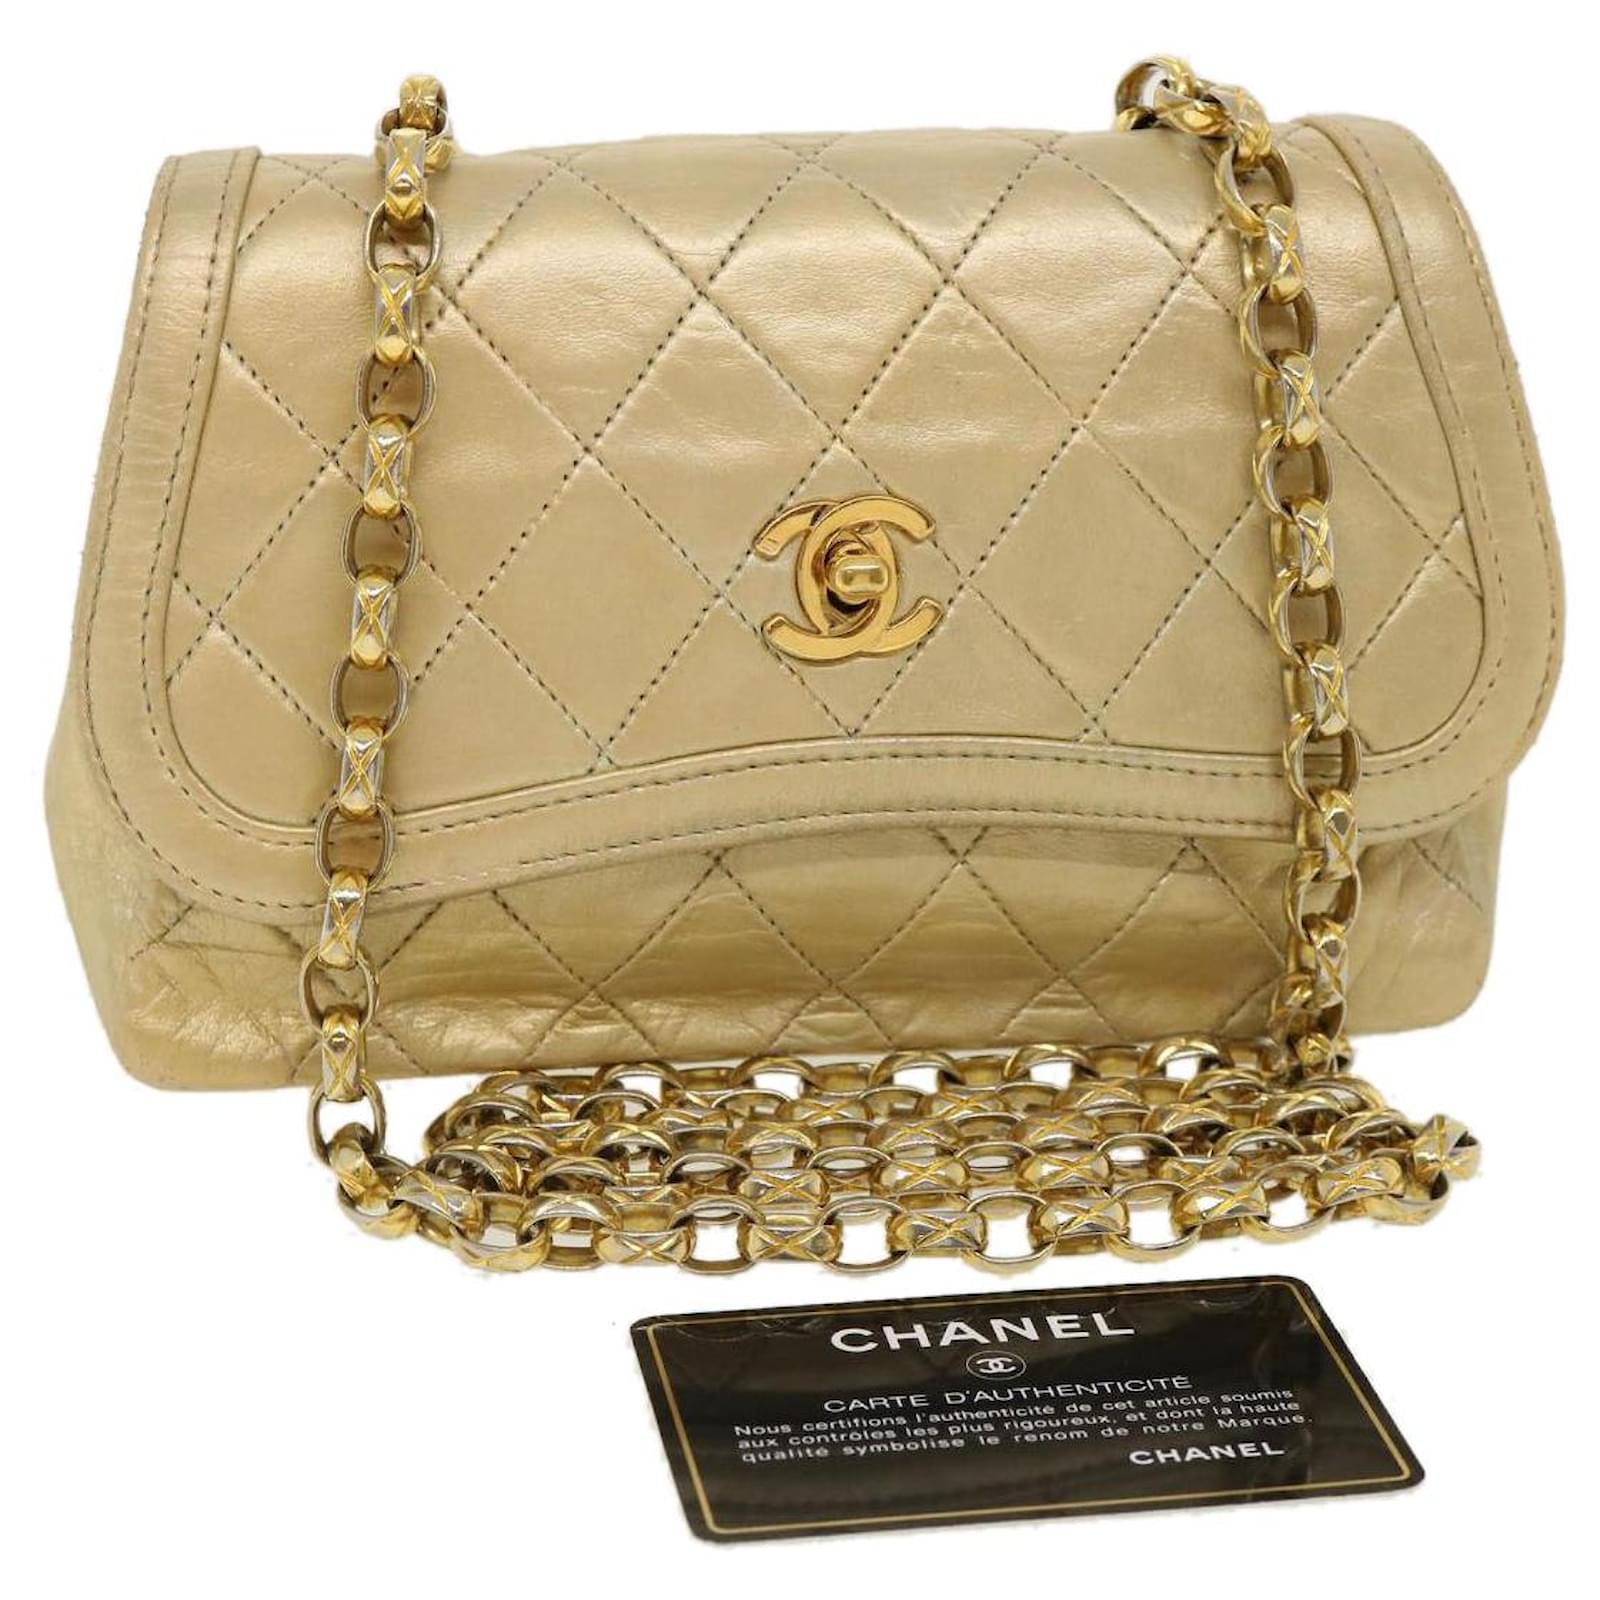 Quilted Sheepskin Leather Gold Chain Shoulder Bag Flap Purse Tote